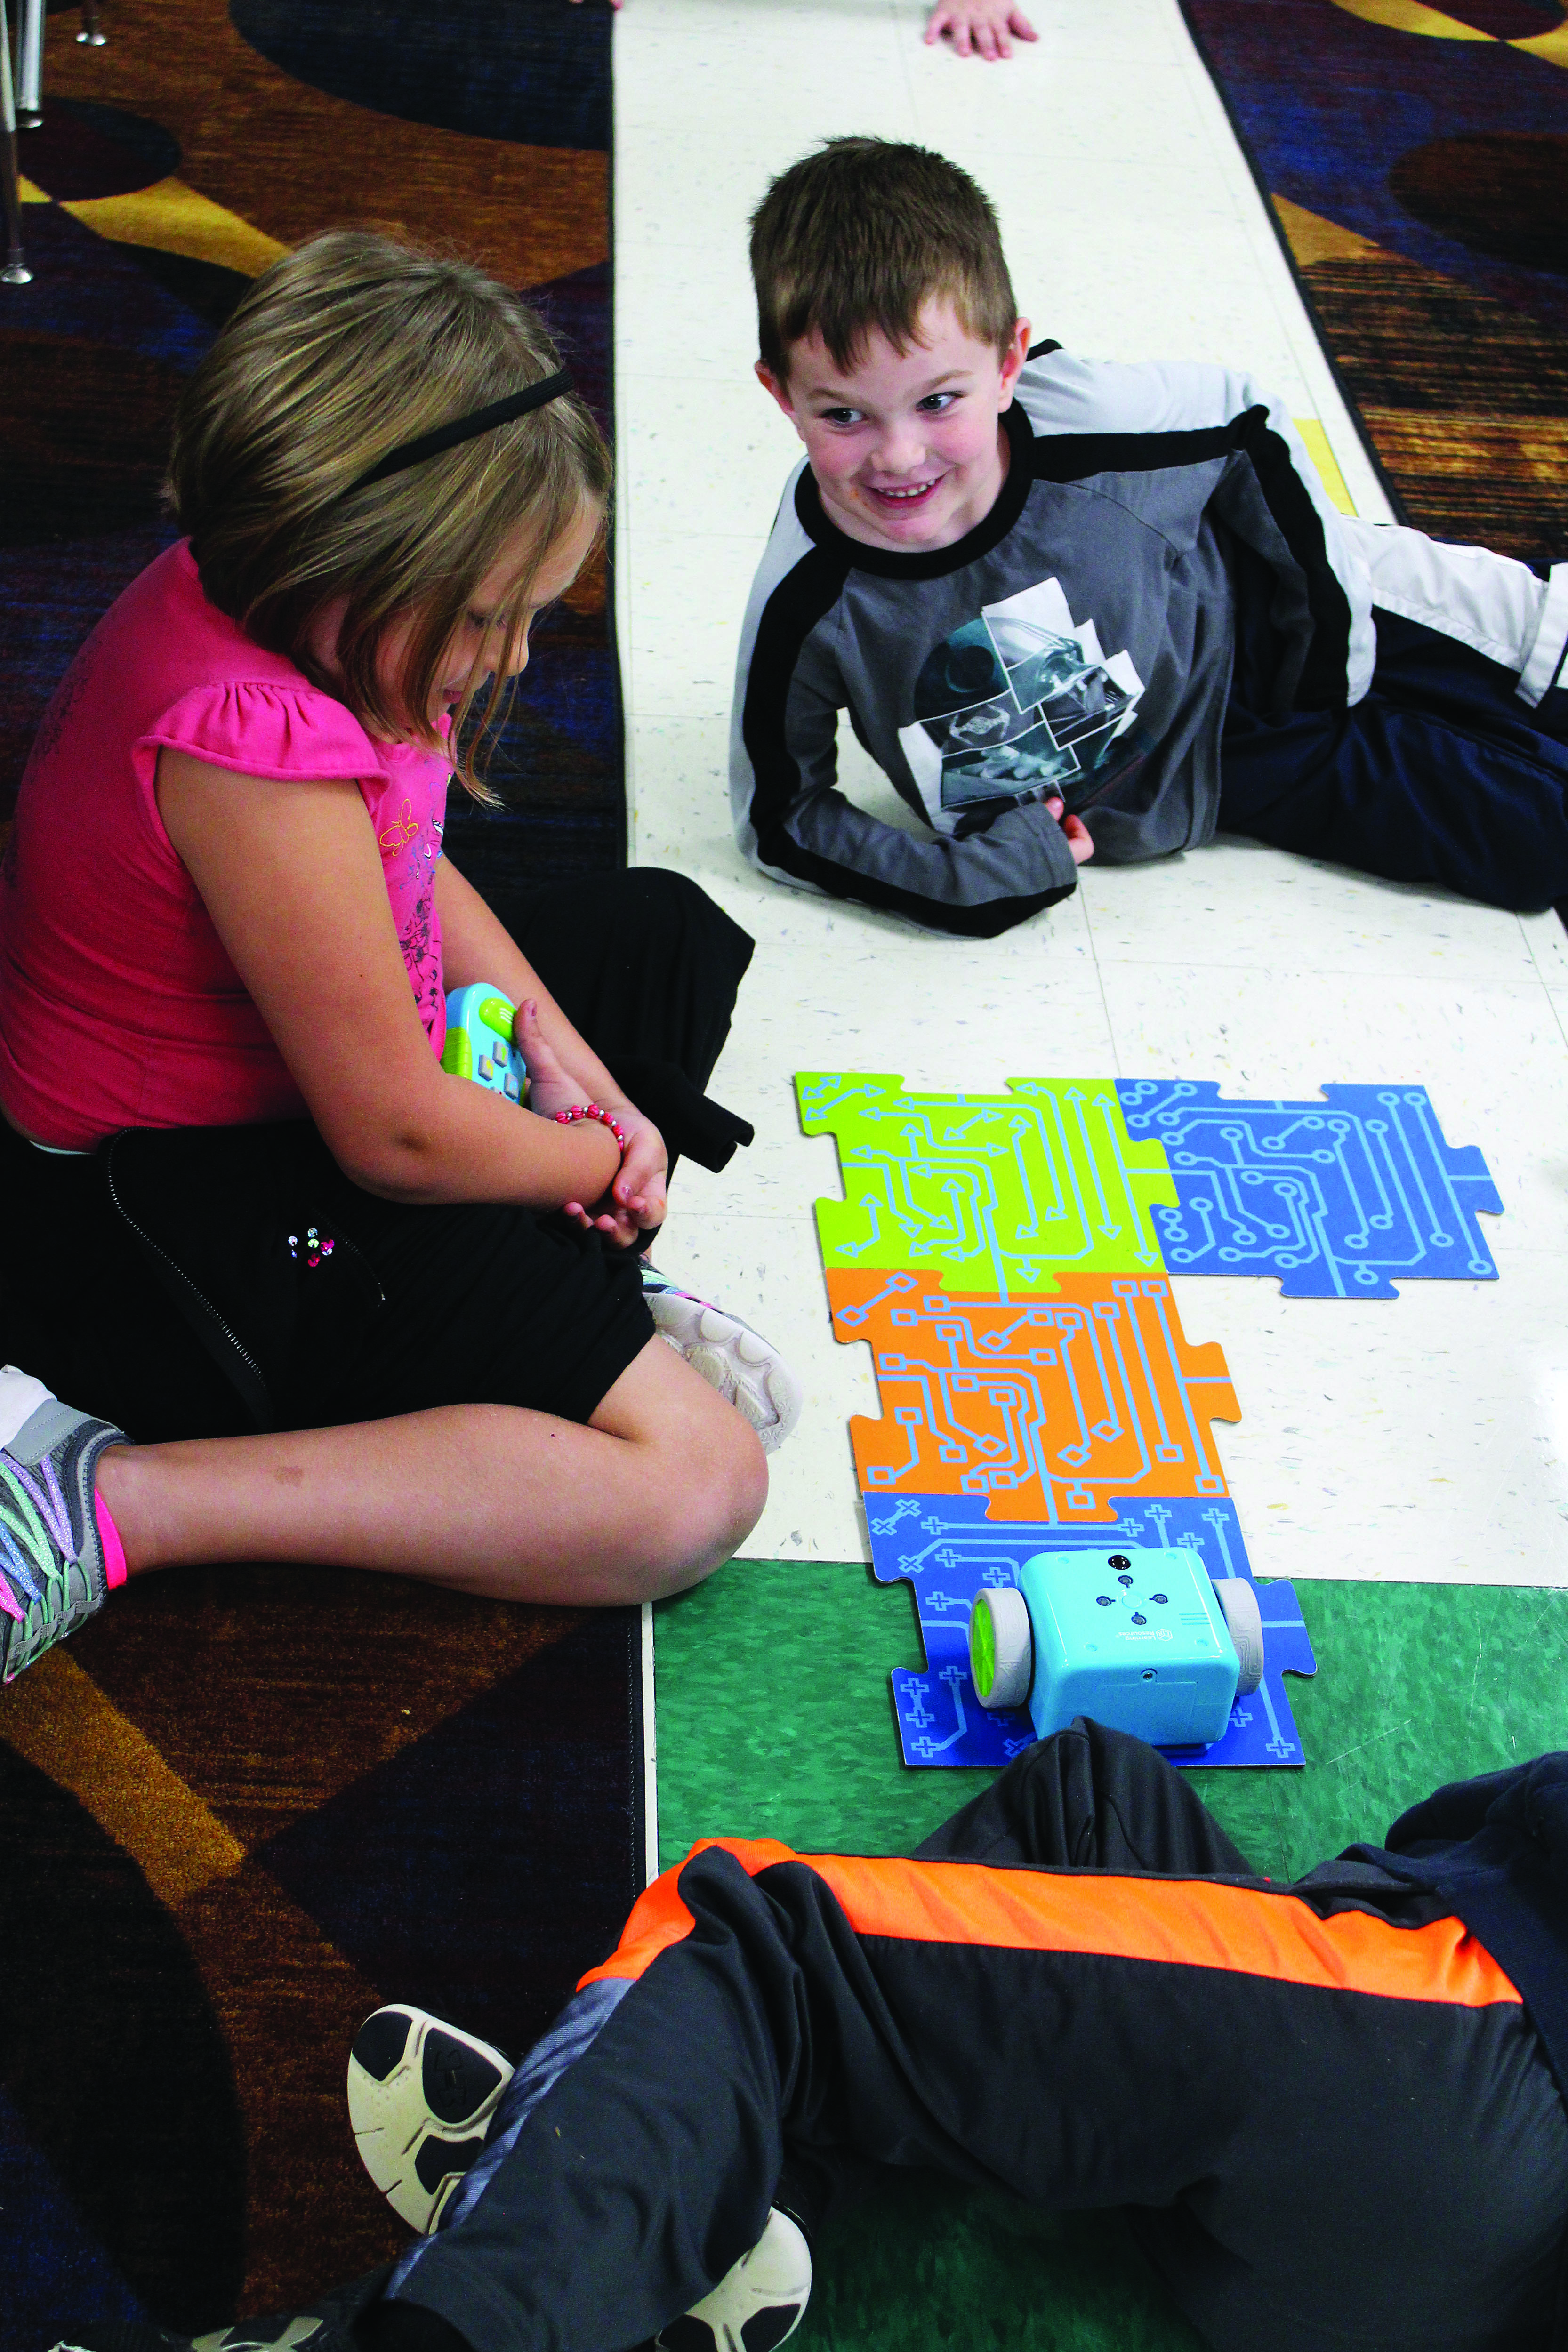 Edgewood Primary School students take turns learning how to code Botley, a small robotic toy used to teach coding during STEM activities. Photo by Nicole McPheeters